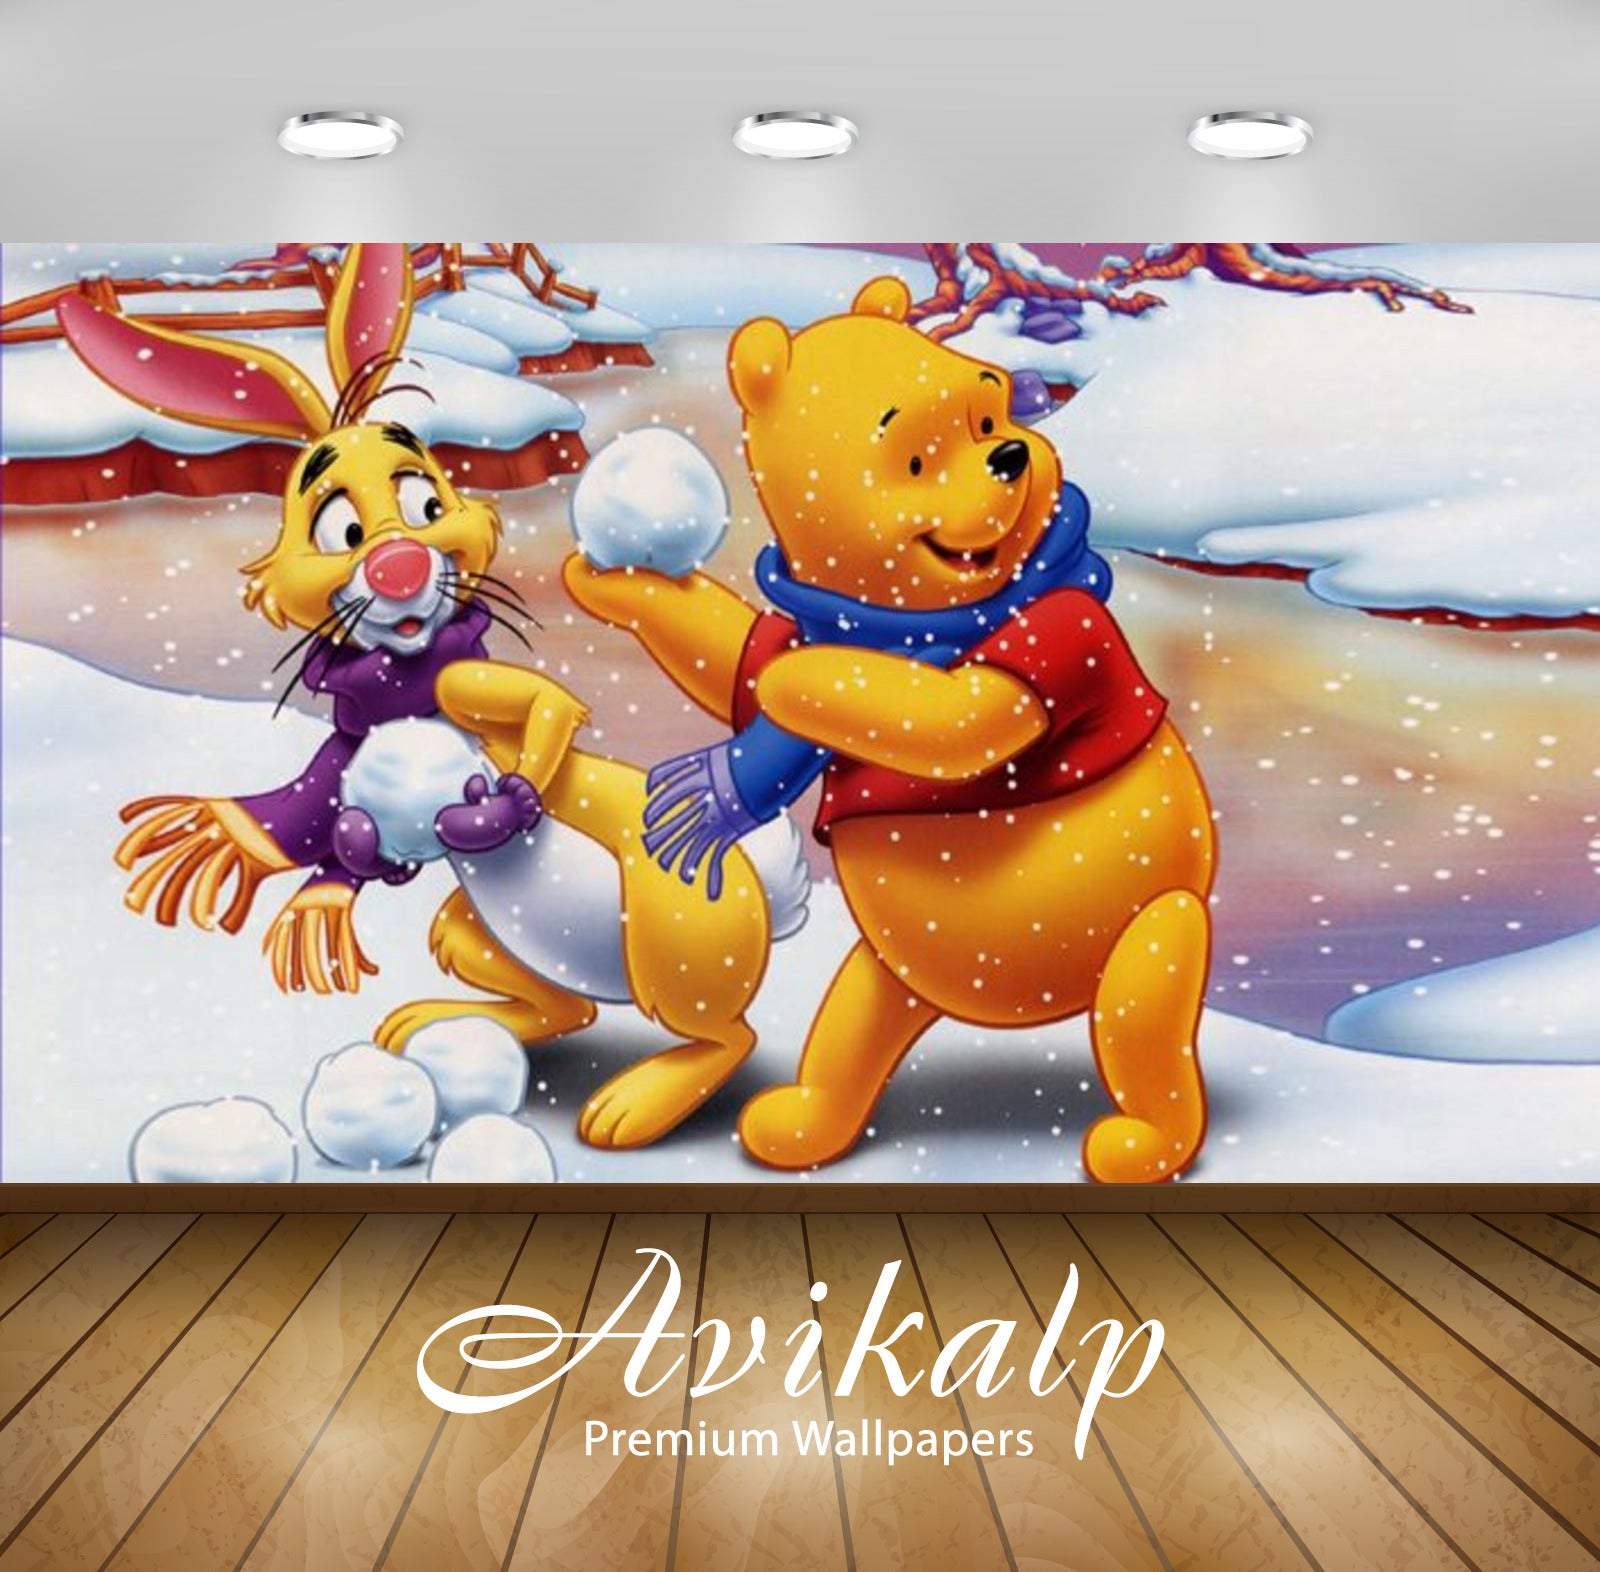 Avikalp Exclusive Awi2323 Winnie the Pooh and Rabbit Winter firing snowballs Full HD Wallpapers for